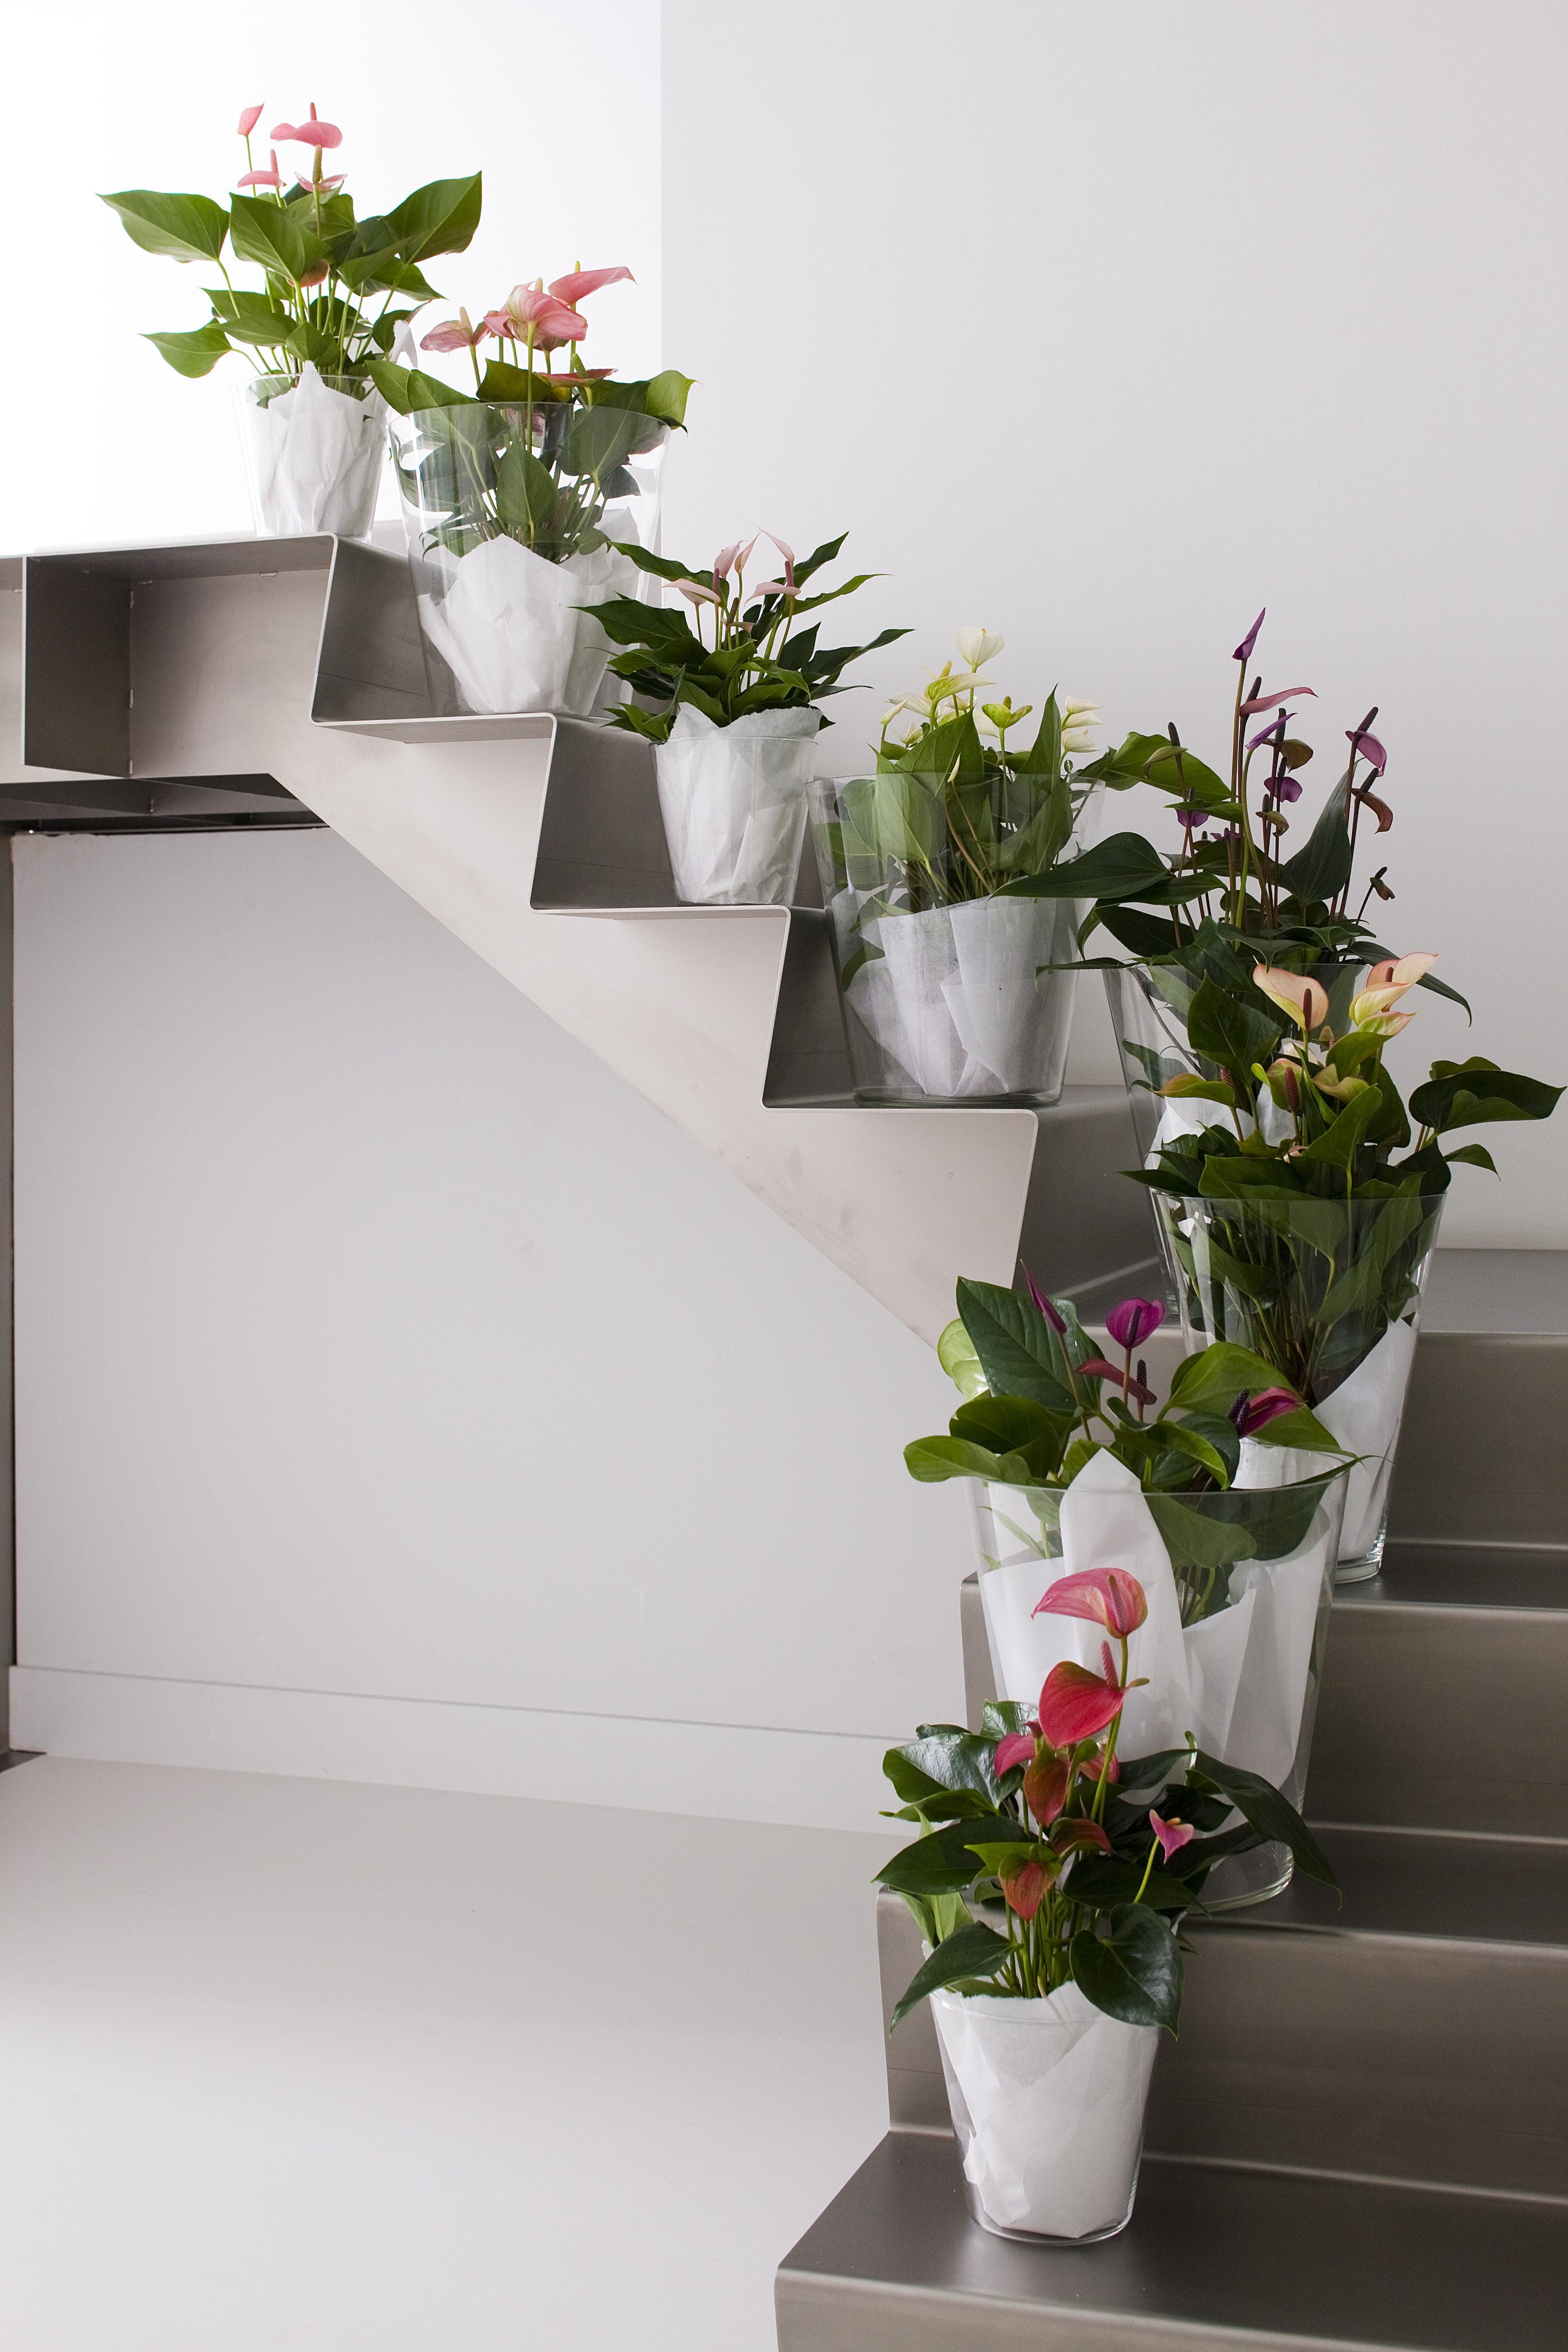 Decorate your stairwell with Anthuriums